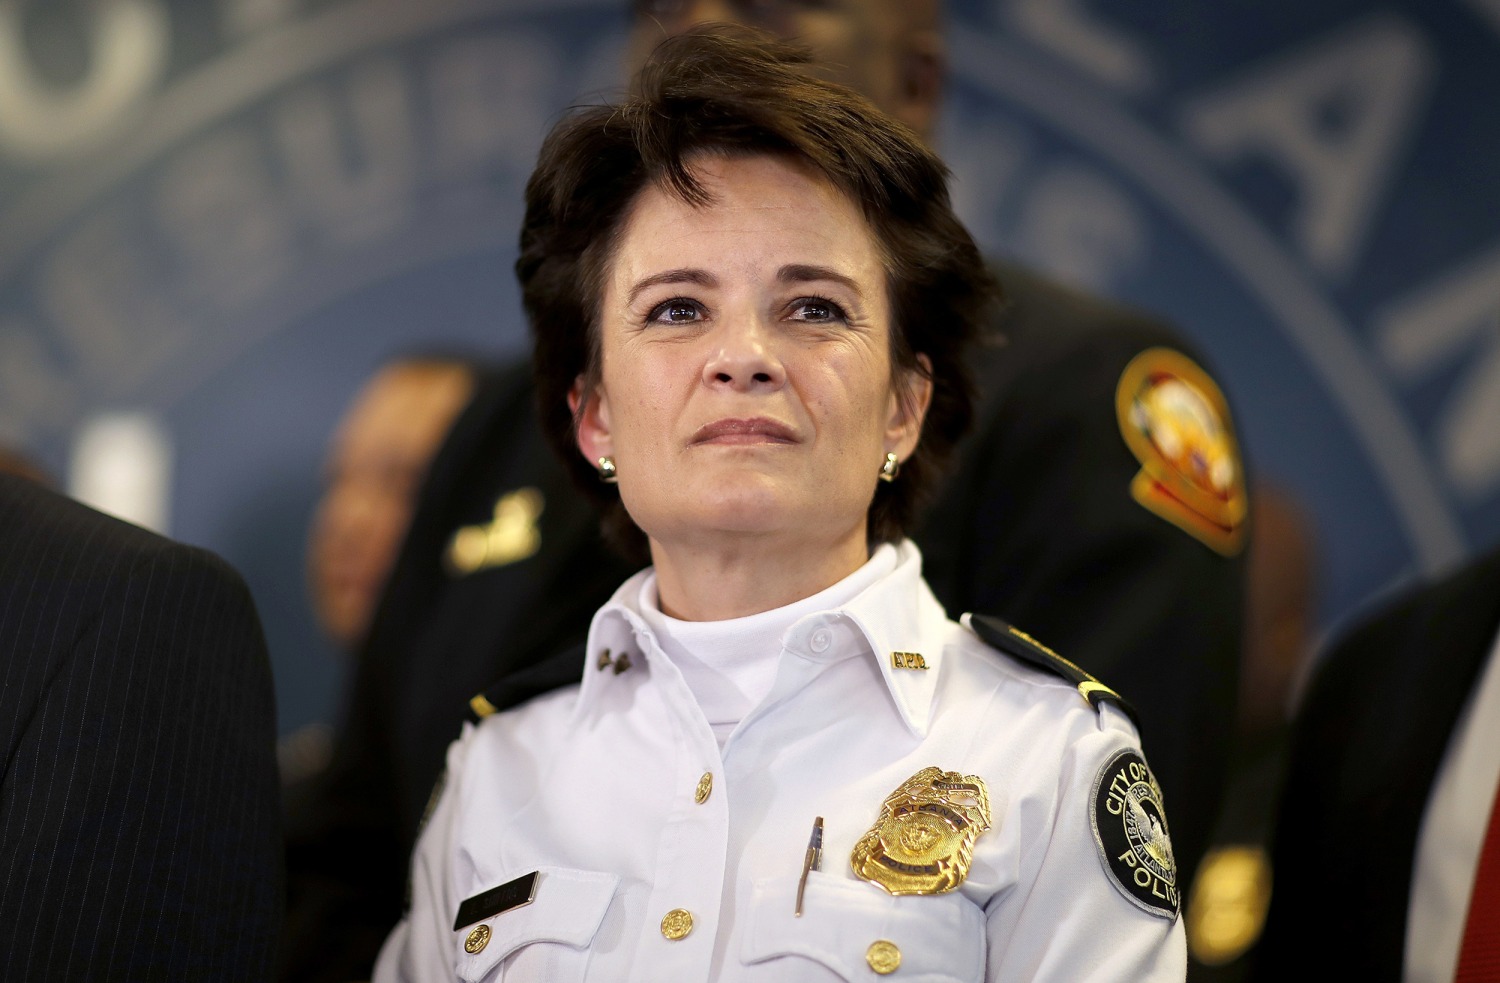 Louisville's Next Interim Police Chief Is a Woman